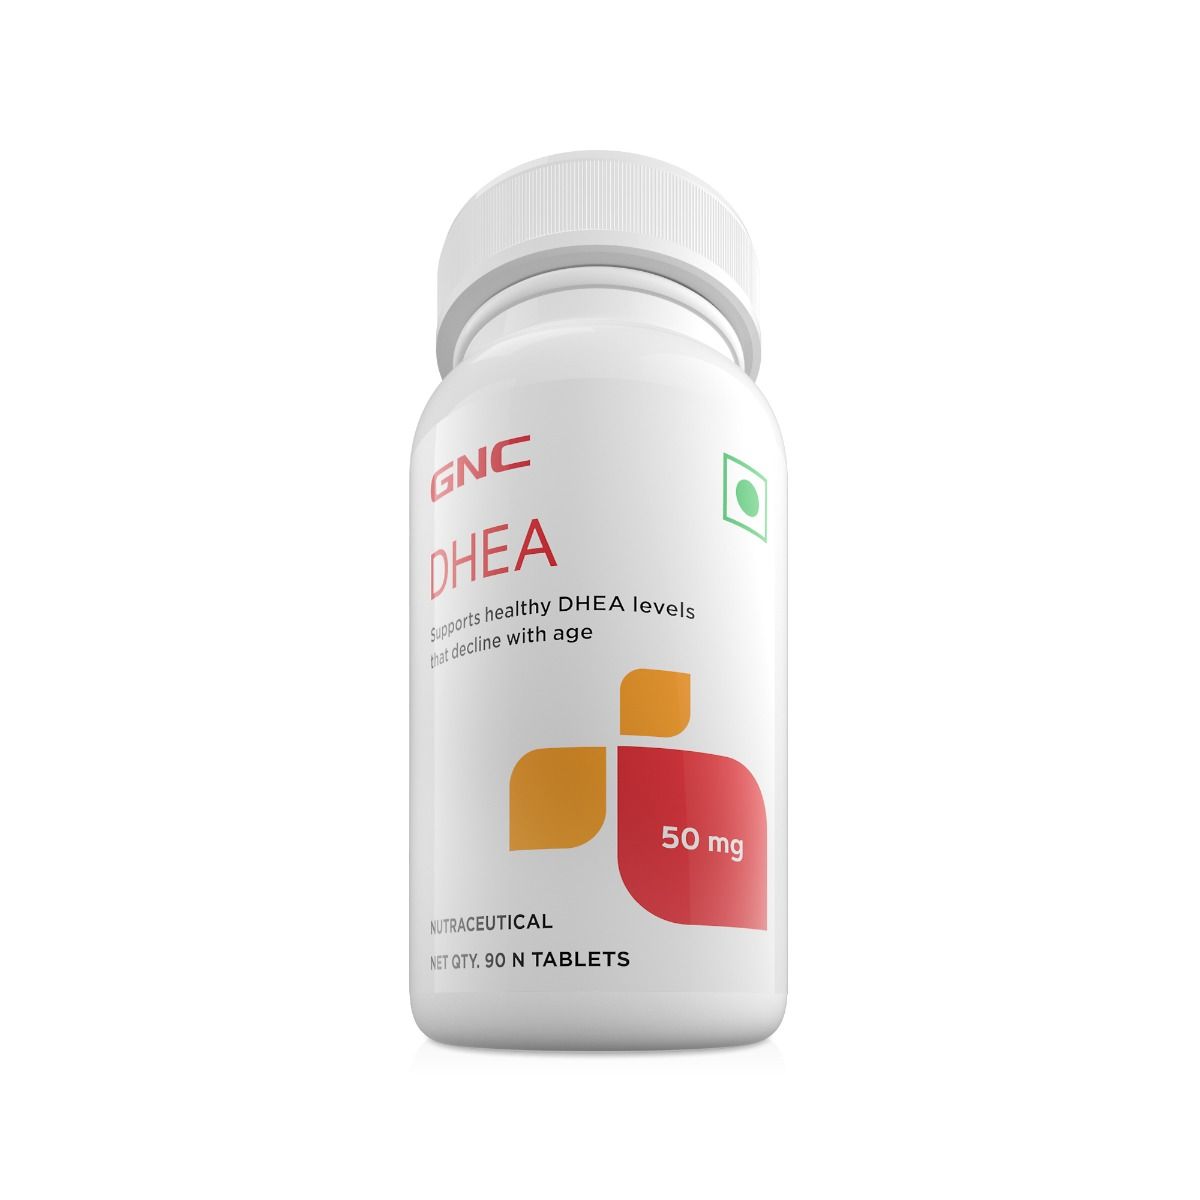 GNC DHEA 50 mg (For Healthy Aging)